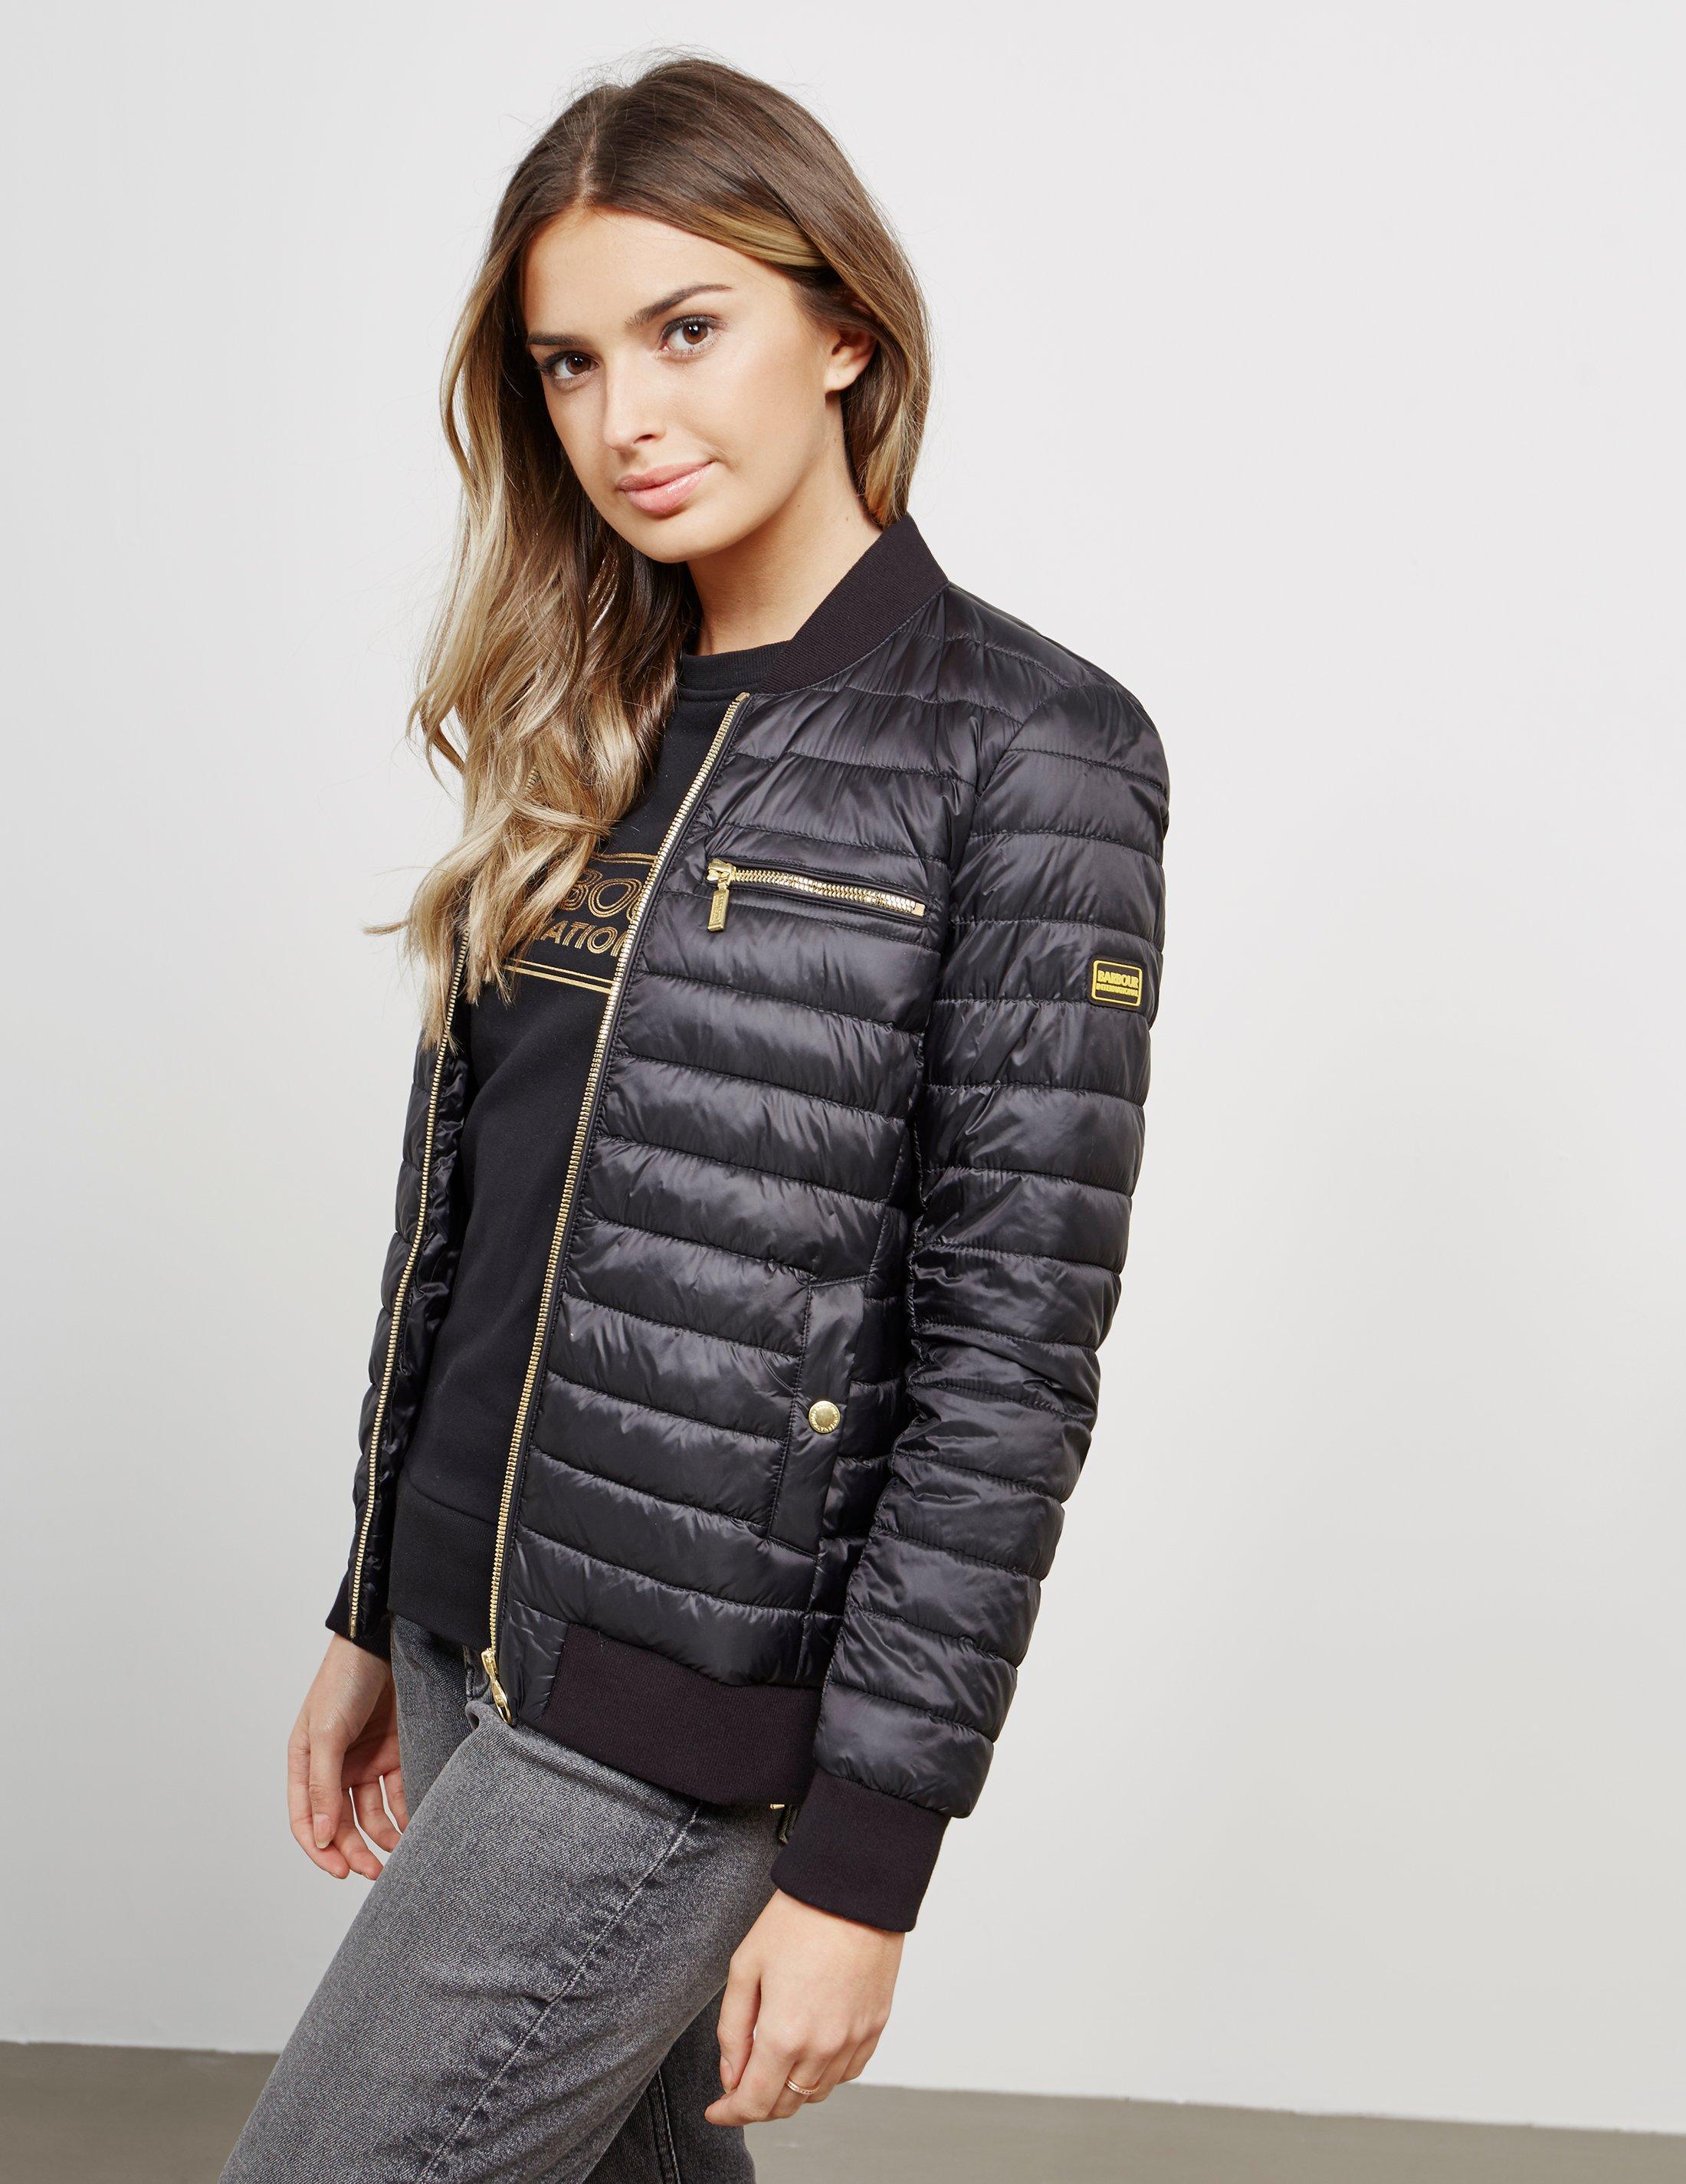 barbour bomber jacket womens